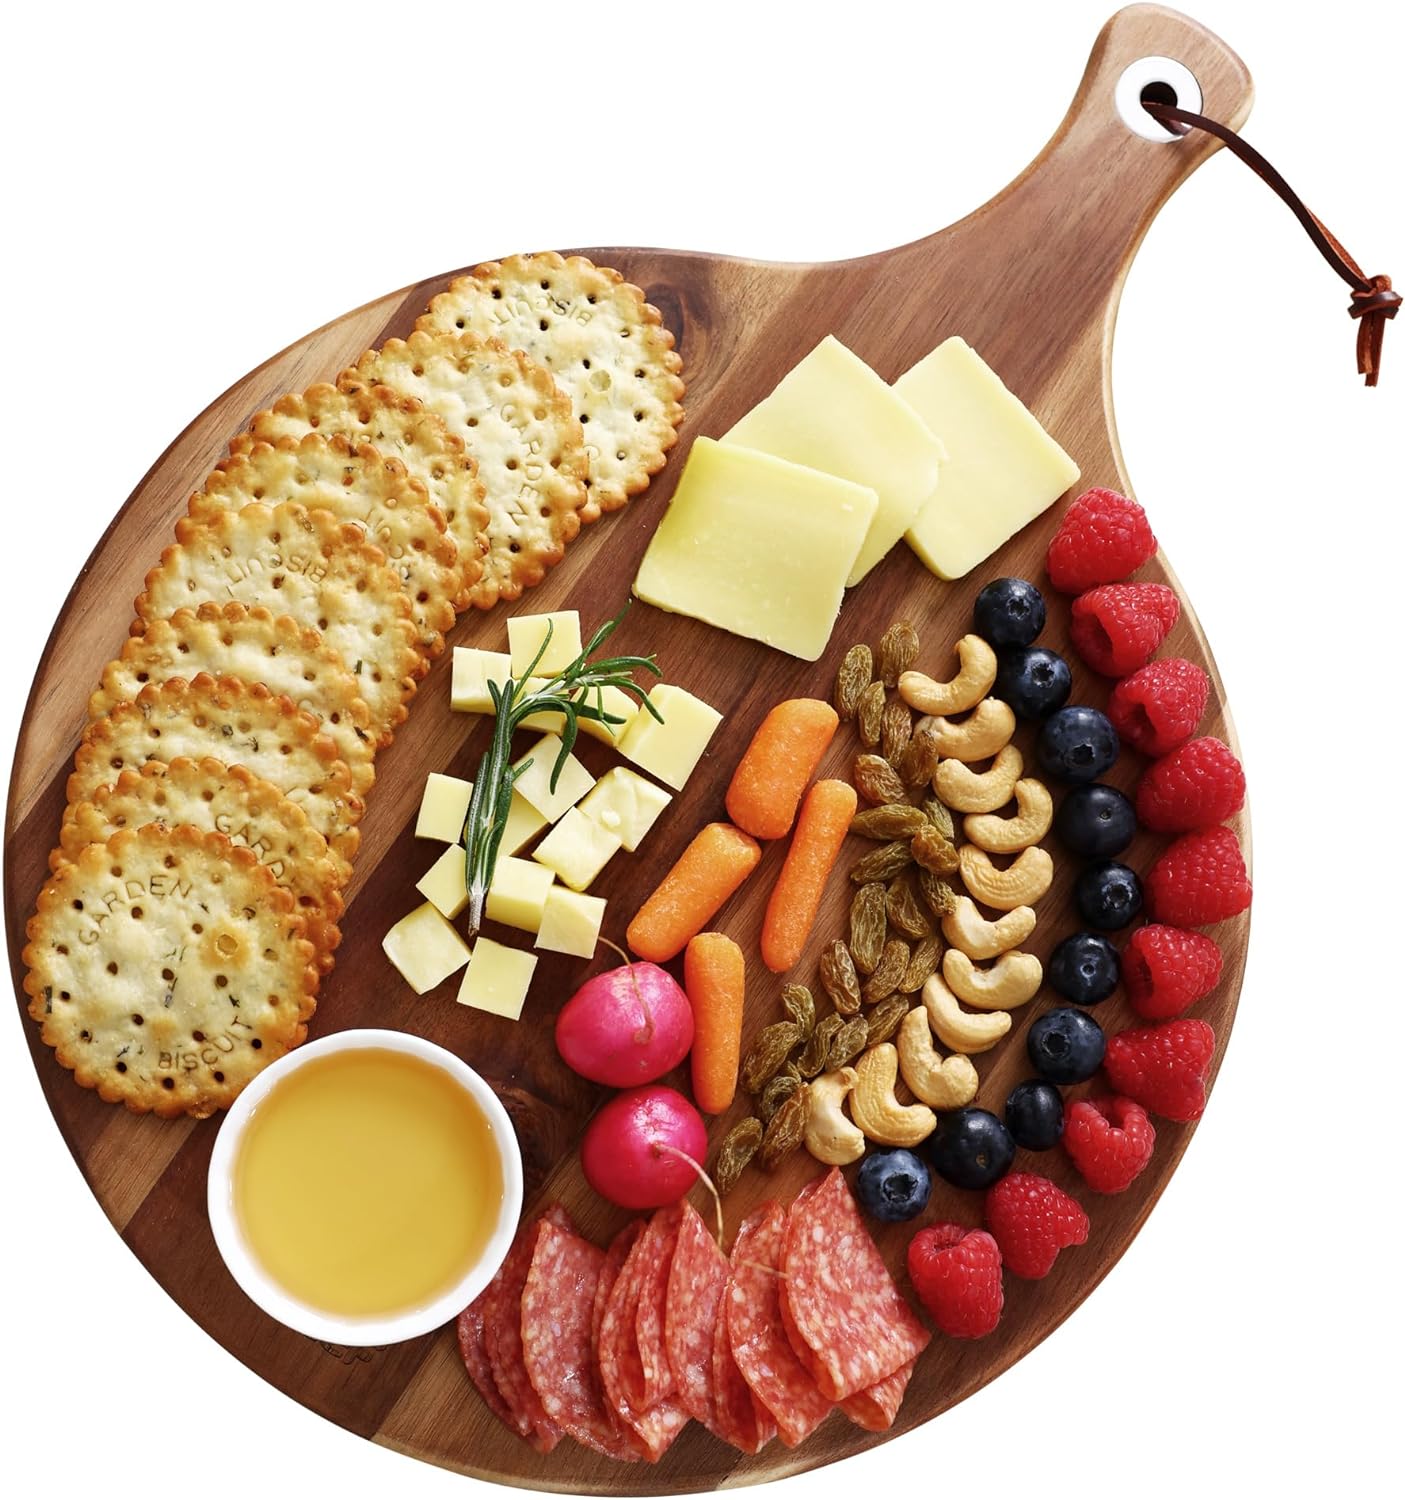 Hecef 12 Inch Large Cheese Board Premium Acacia Wood Charcuterie Board, Round Cheese Platter Cutting Board with Paddle Handle for Pizza Fruits Vegetables Bread, Food Serving Tray Gift Set for Kitchen - Hecef Kitchen